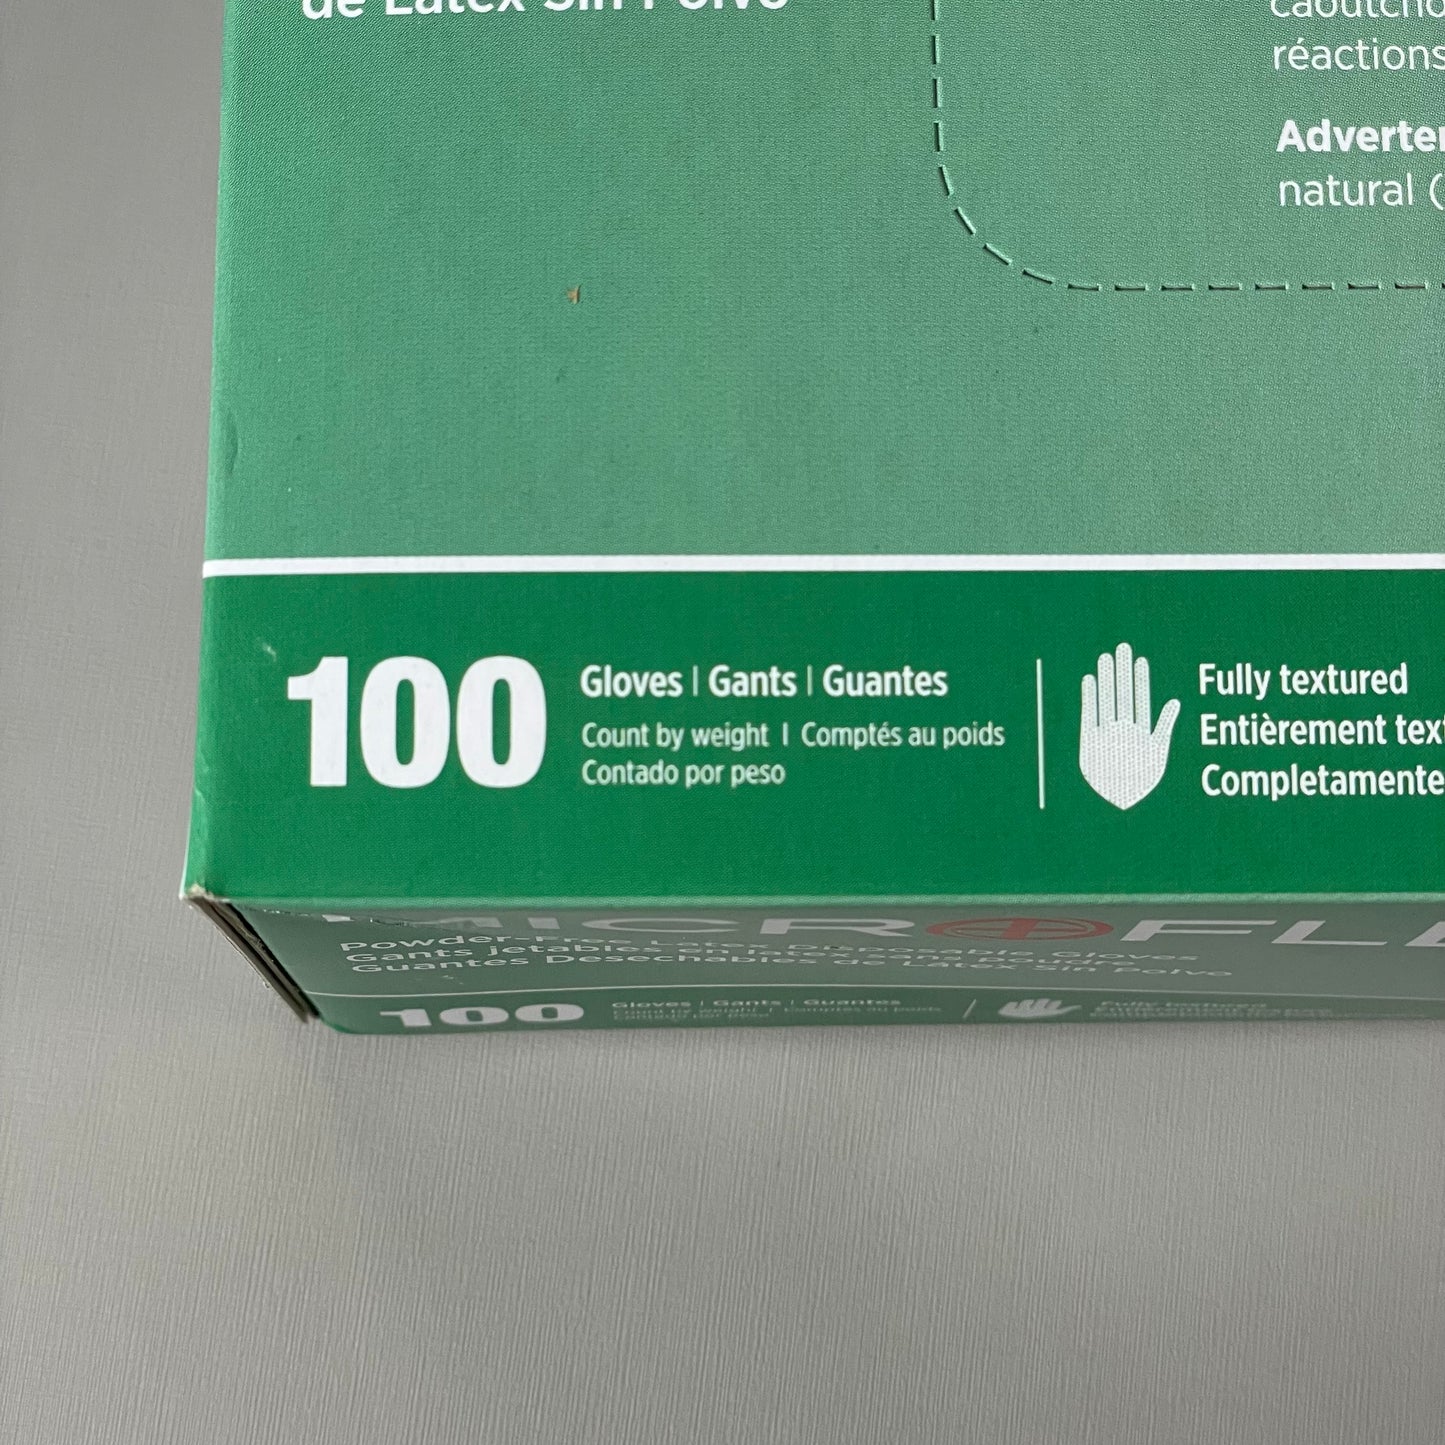 ANSELL MICROFLEX Case Of 10 Powder-Free Latex Disposable Gloves Sz M 100 Pc L562 (New)